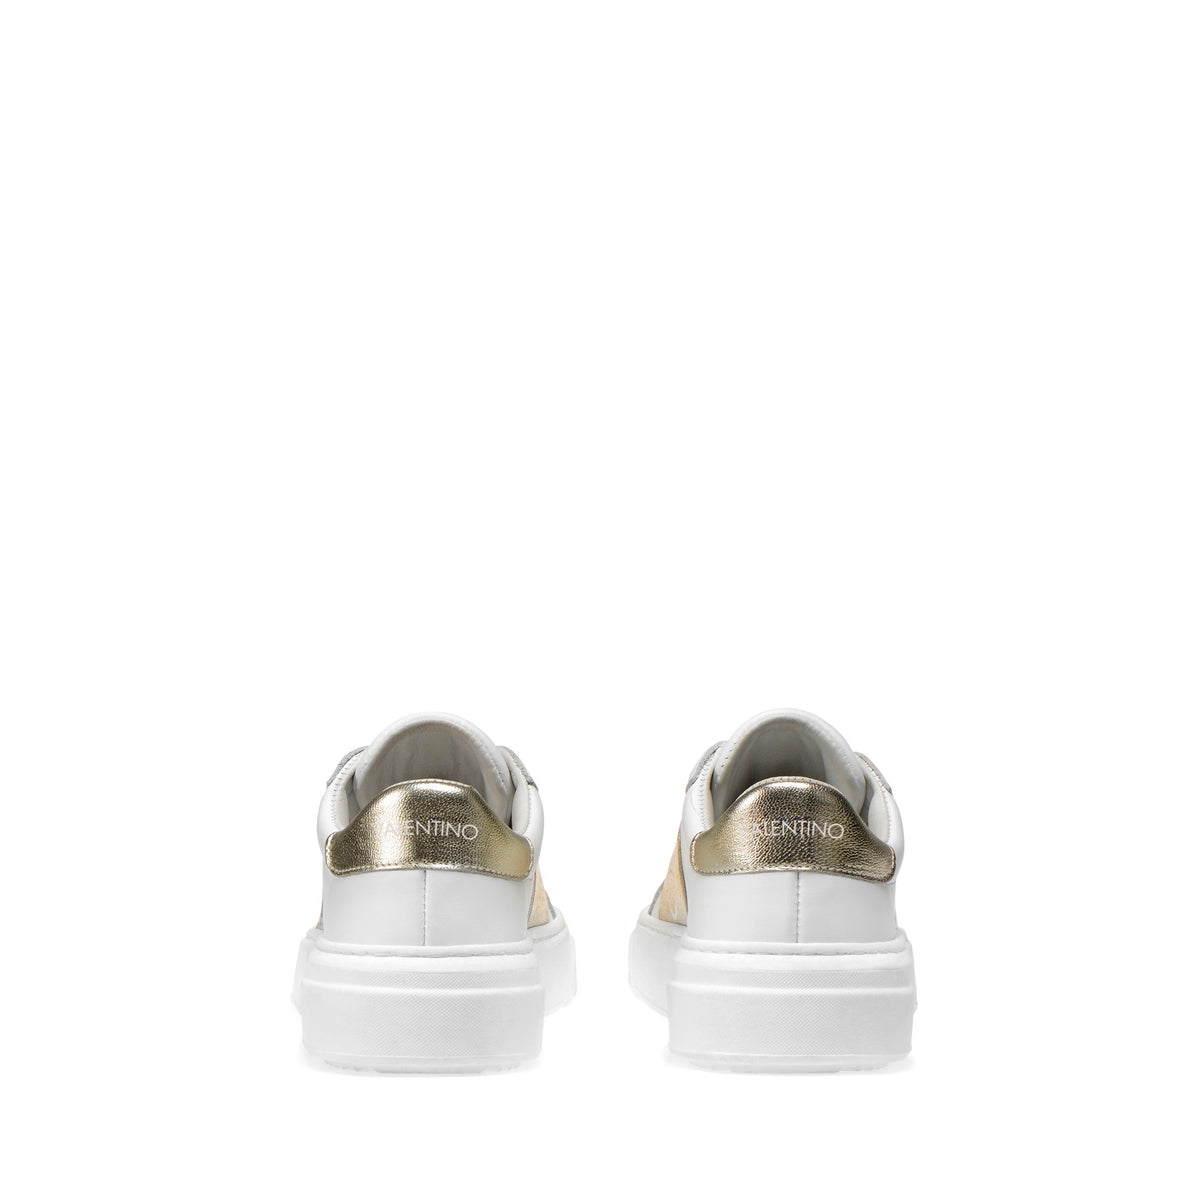 Plicht Staat Gespecificeerd Valentino Sneakers Slip-On for Women in White Leather and Gold Detail – Valentino  Shoes